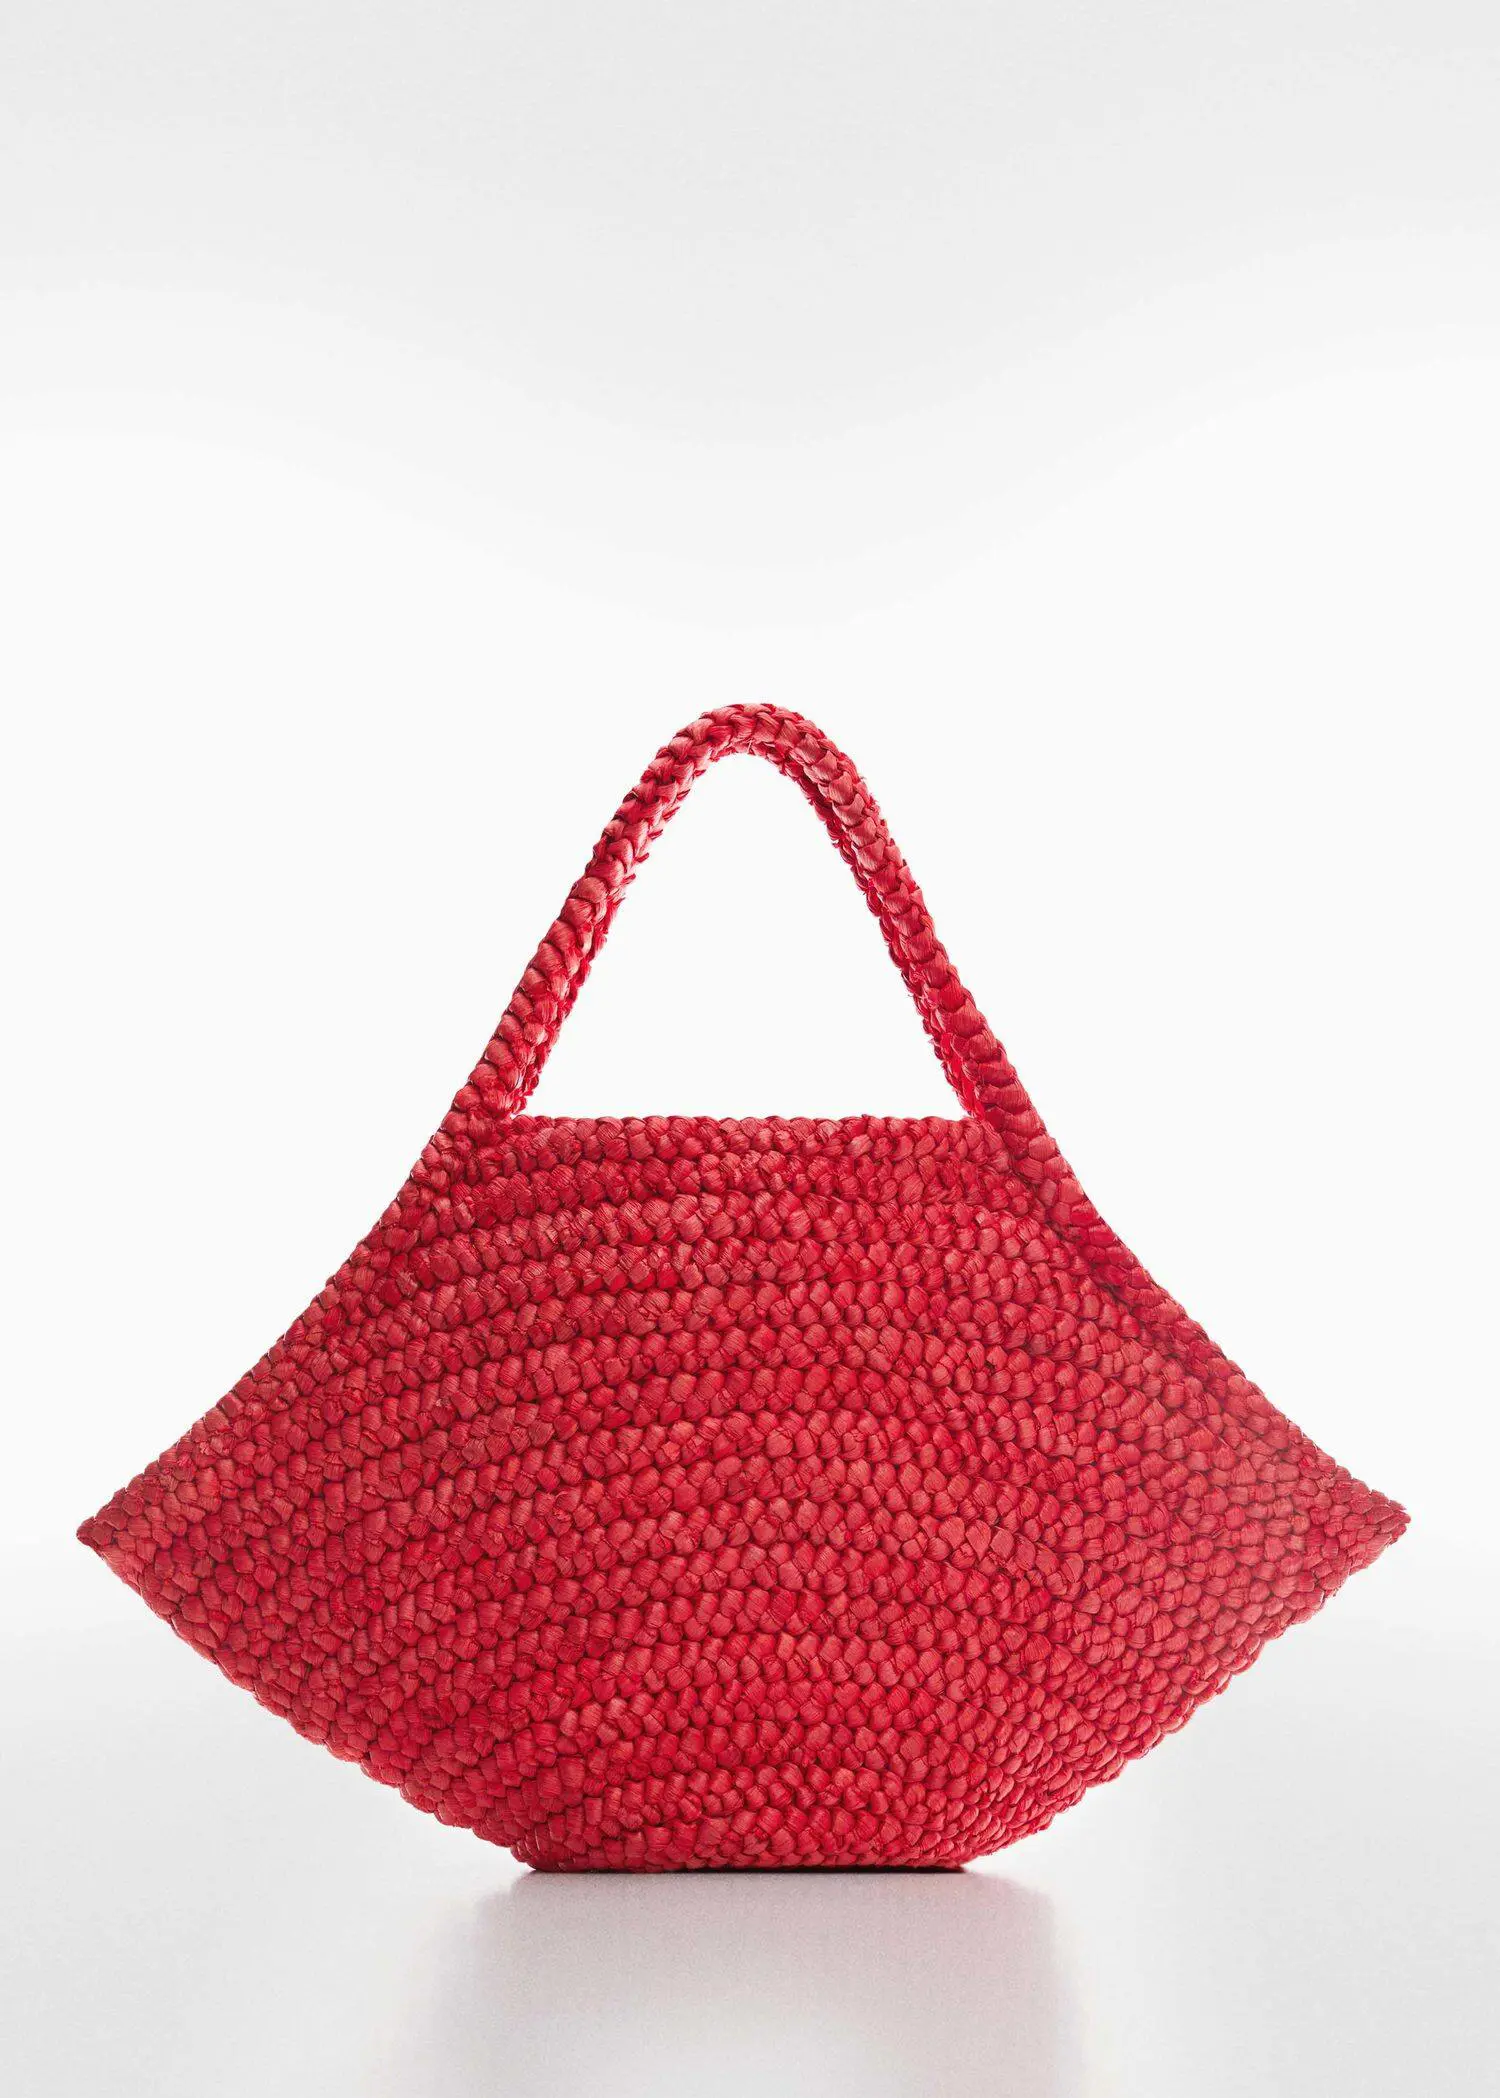 Mango Natural fibre maxi tote bag. a close up of a red bag on a white background 